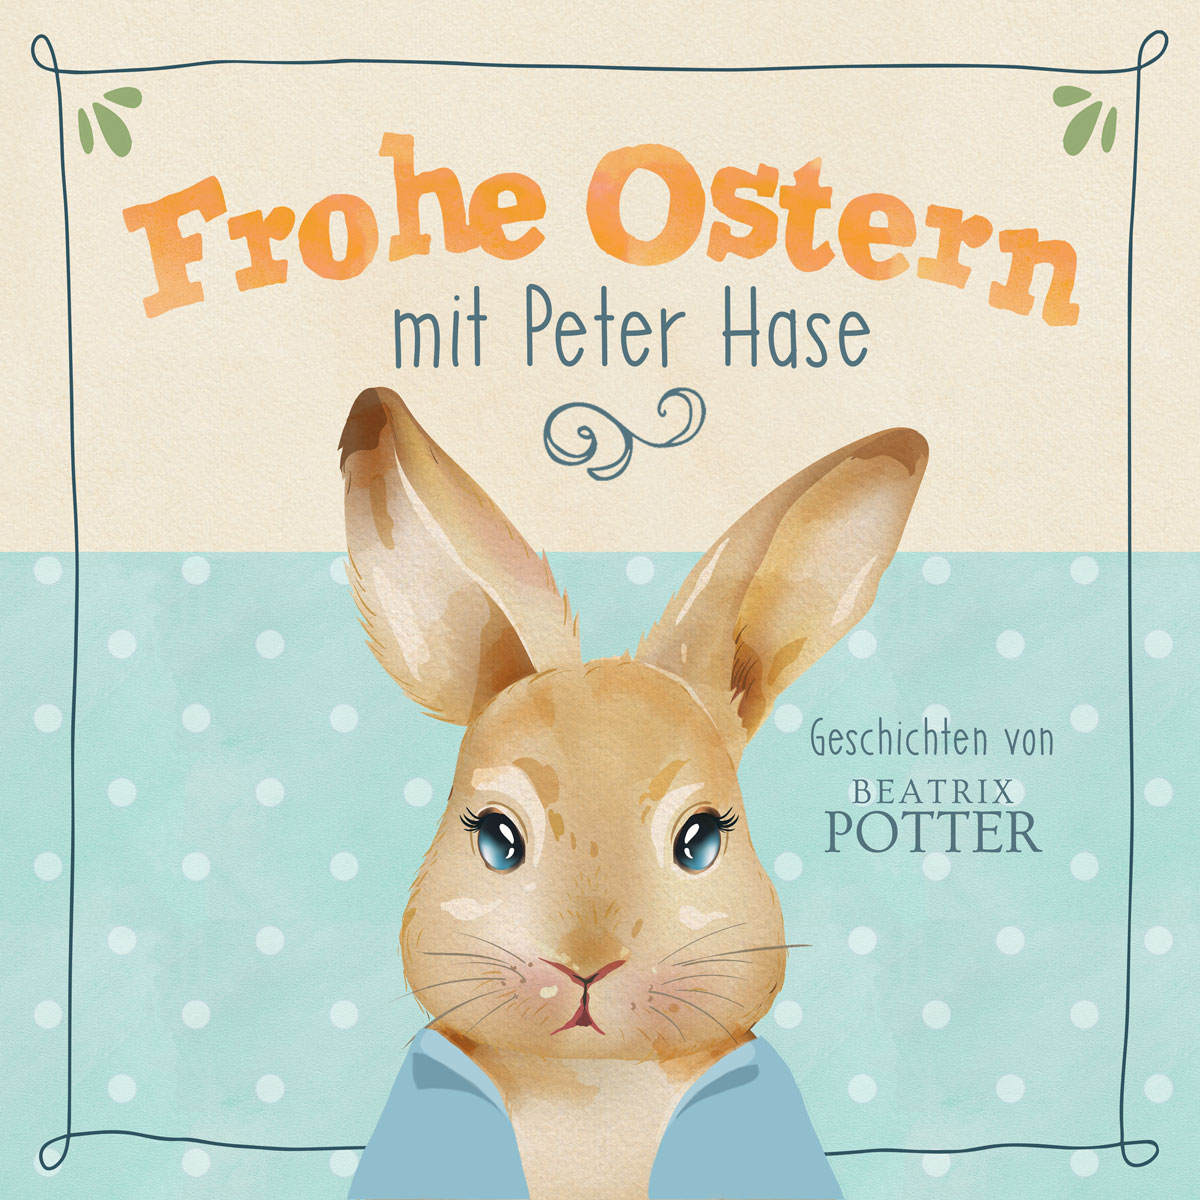 Frohe Ostern mit Peter Hase